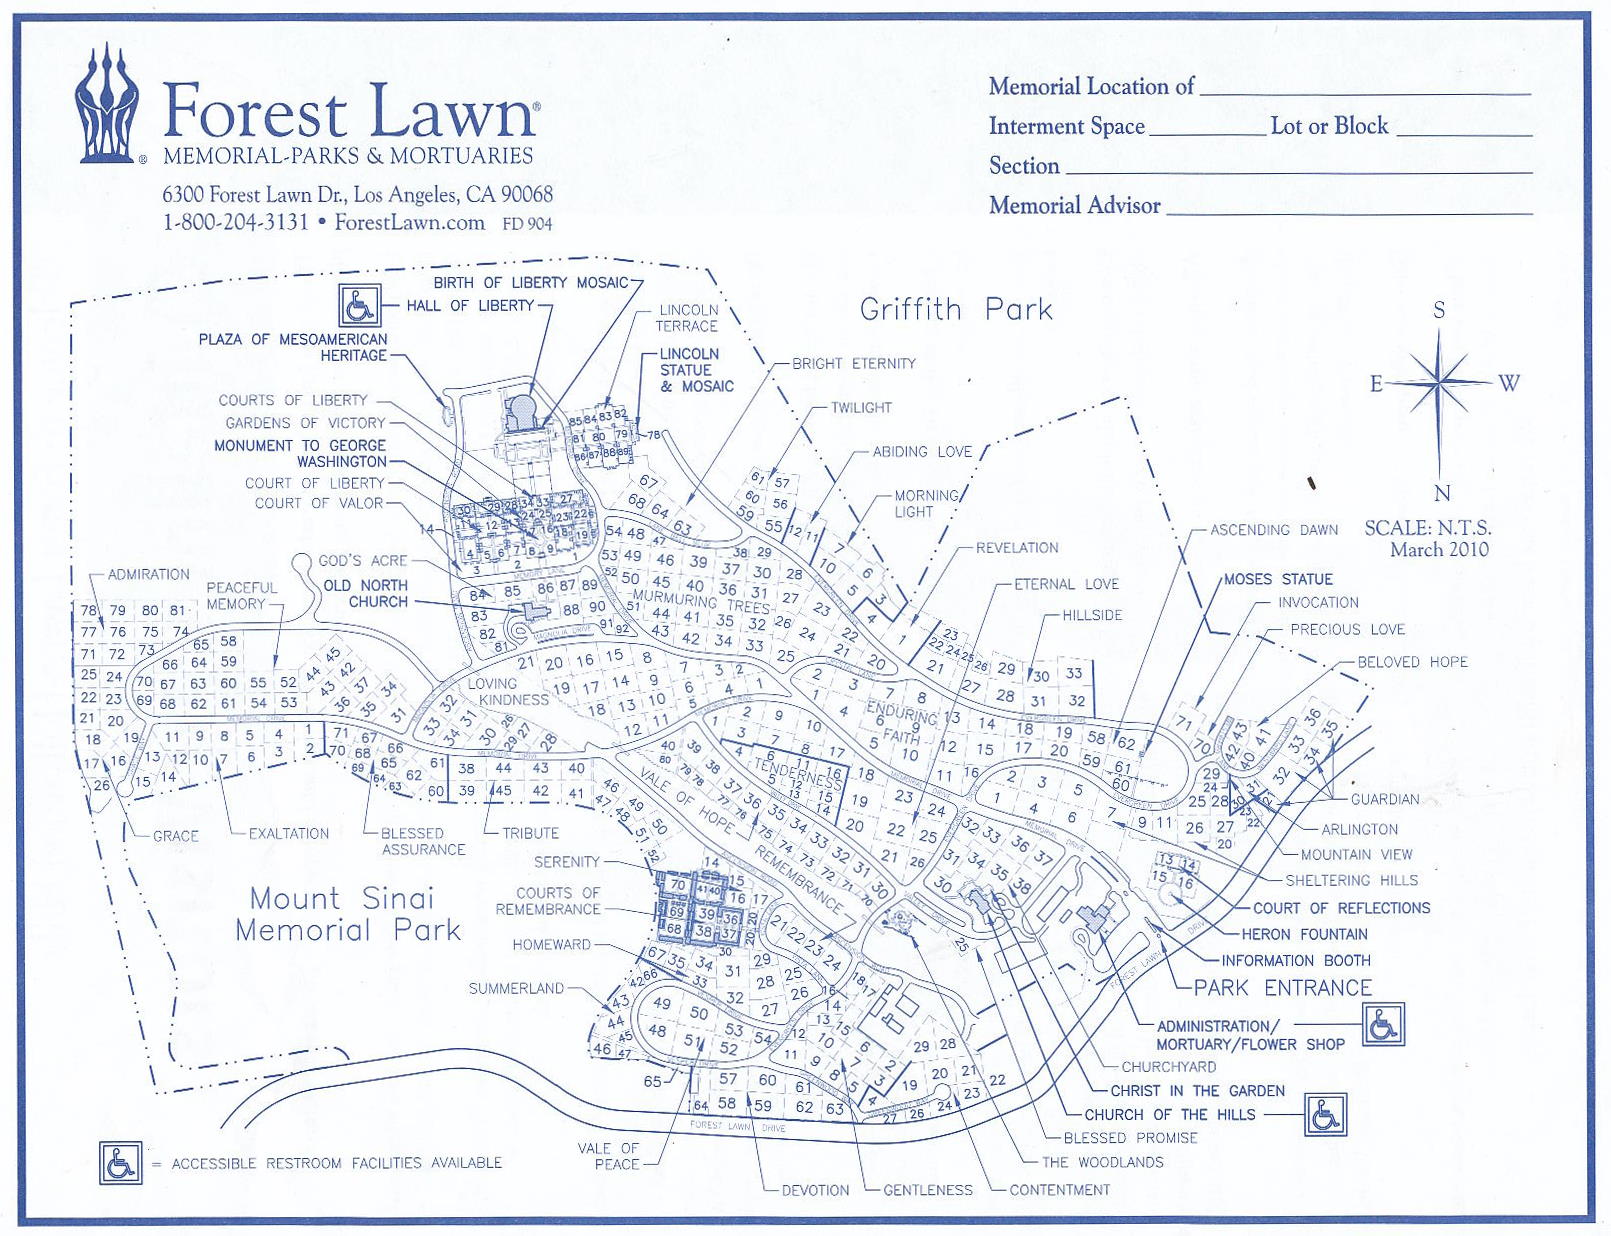 Map of Forest Lawn Memorial Cemetery - Hollywood Hills in Los Angeles, California